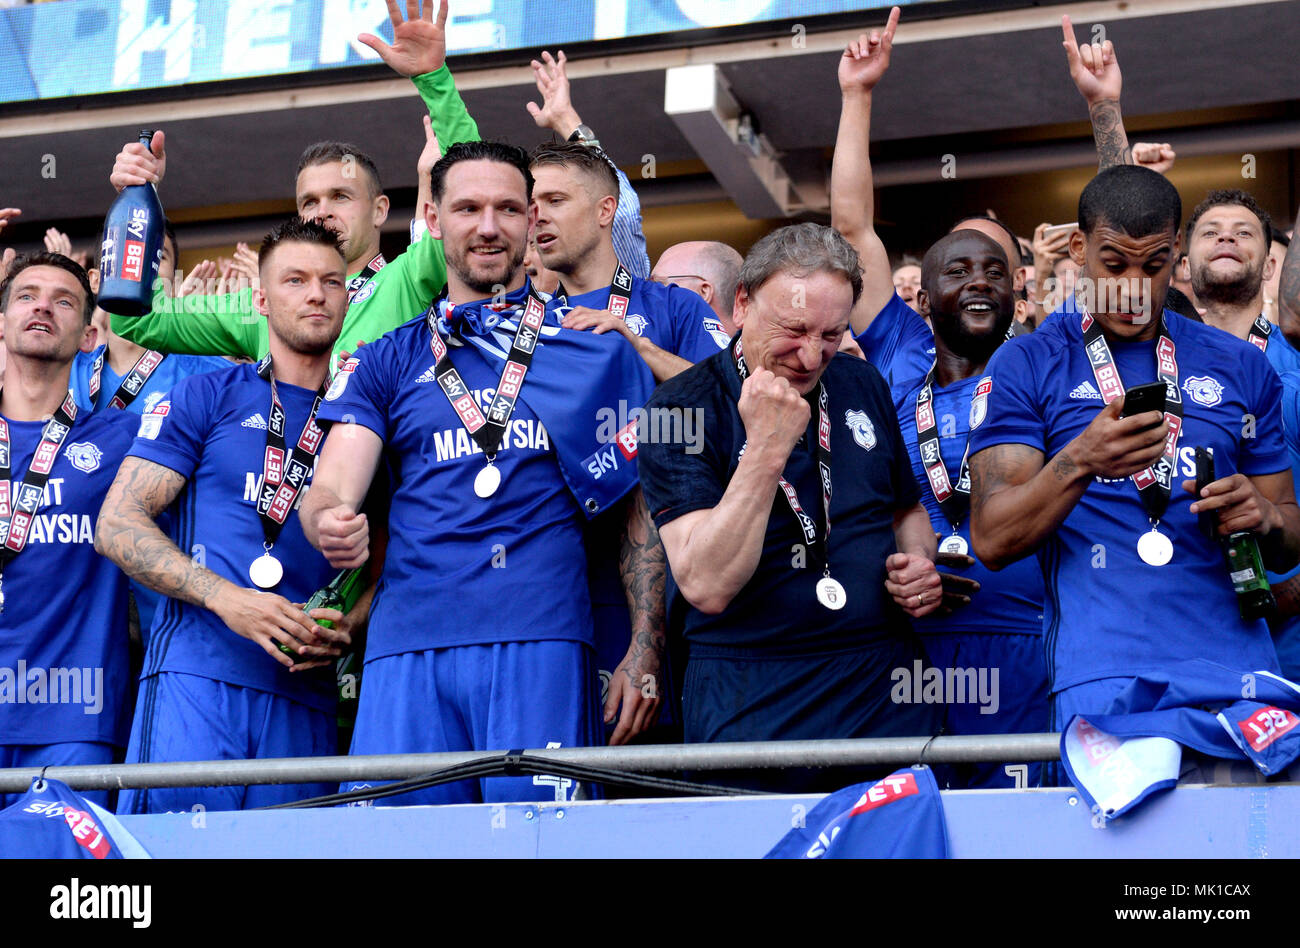 Exclusive: Samtrade FX becomes back-of-shirt sponsor for Cardiff City - FX  News Group